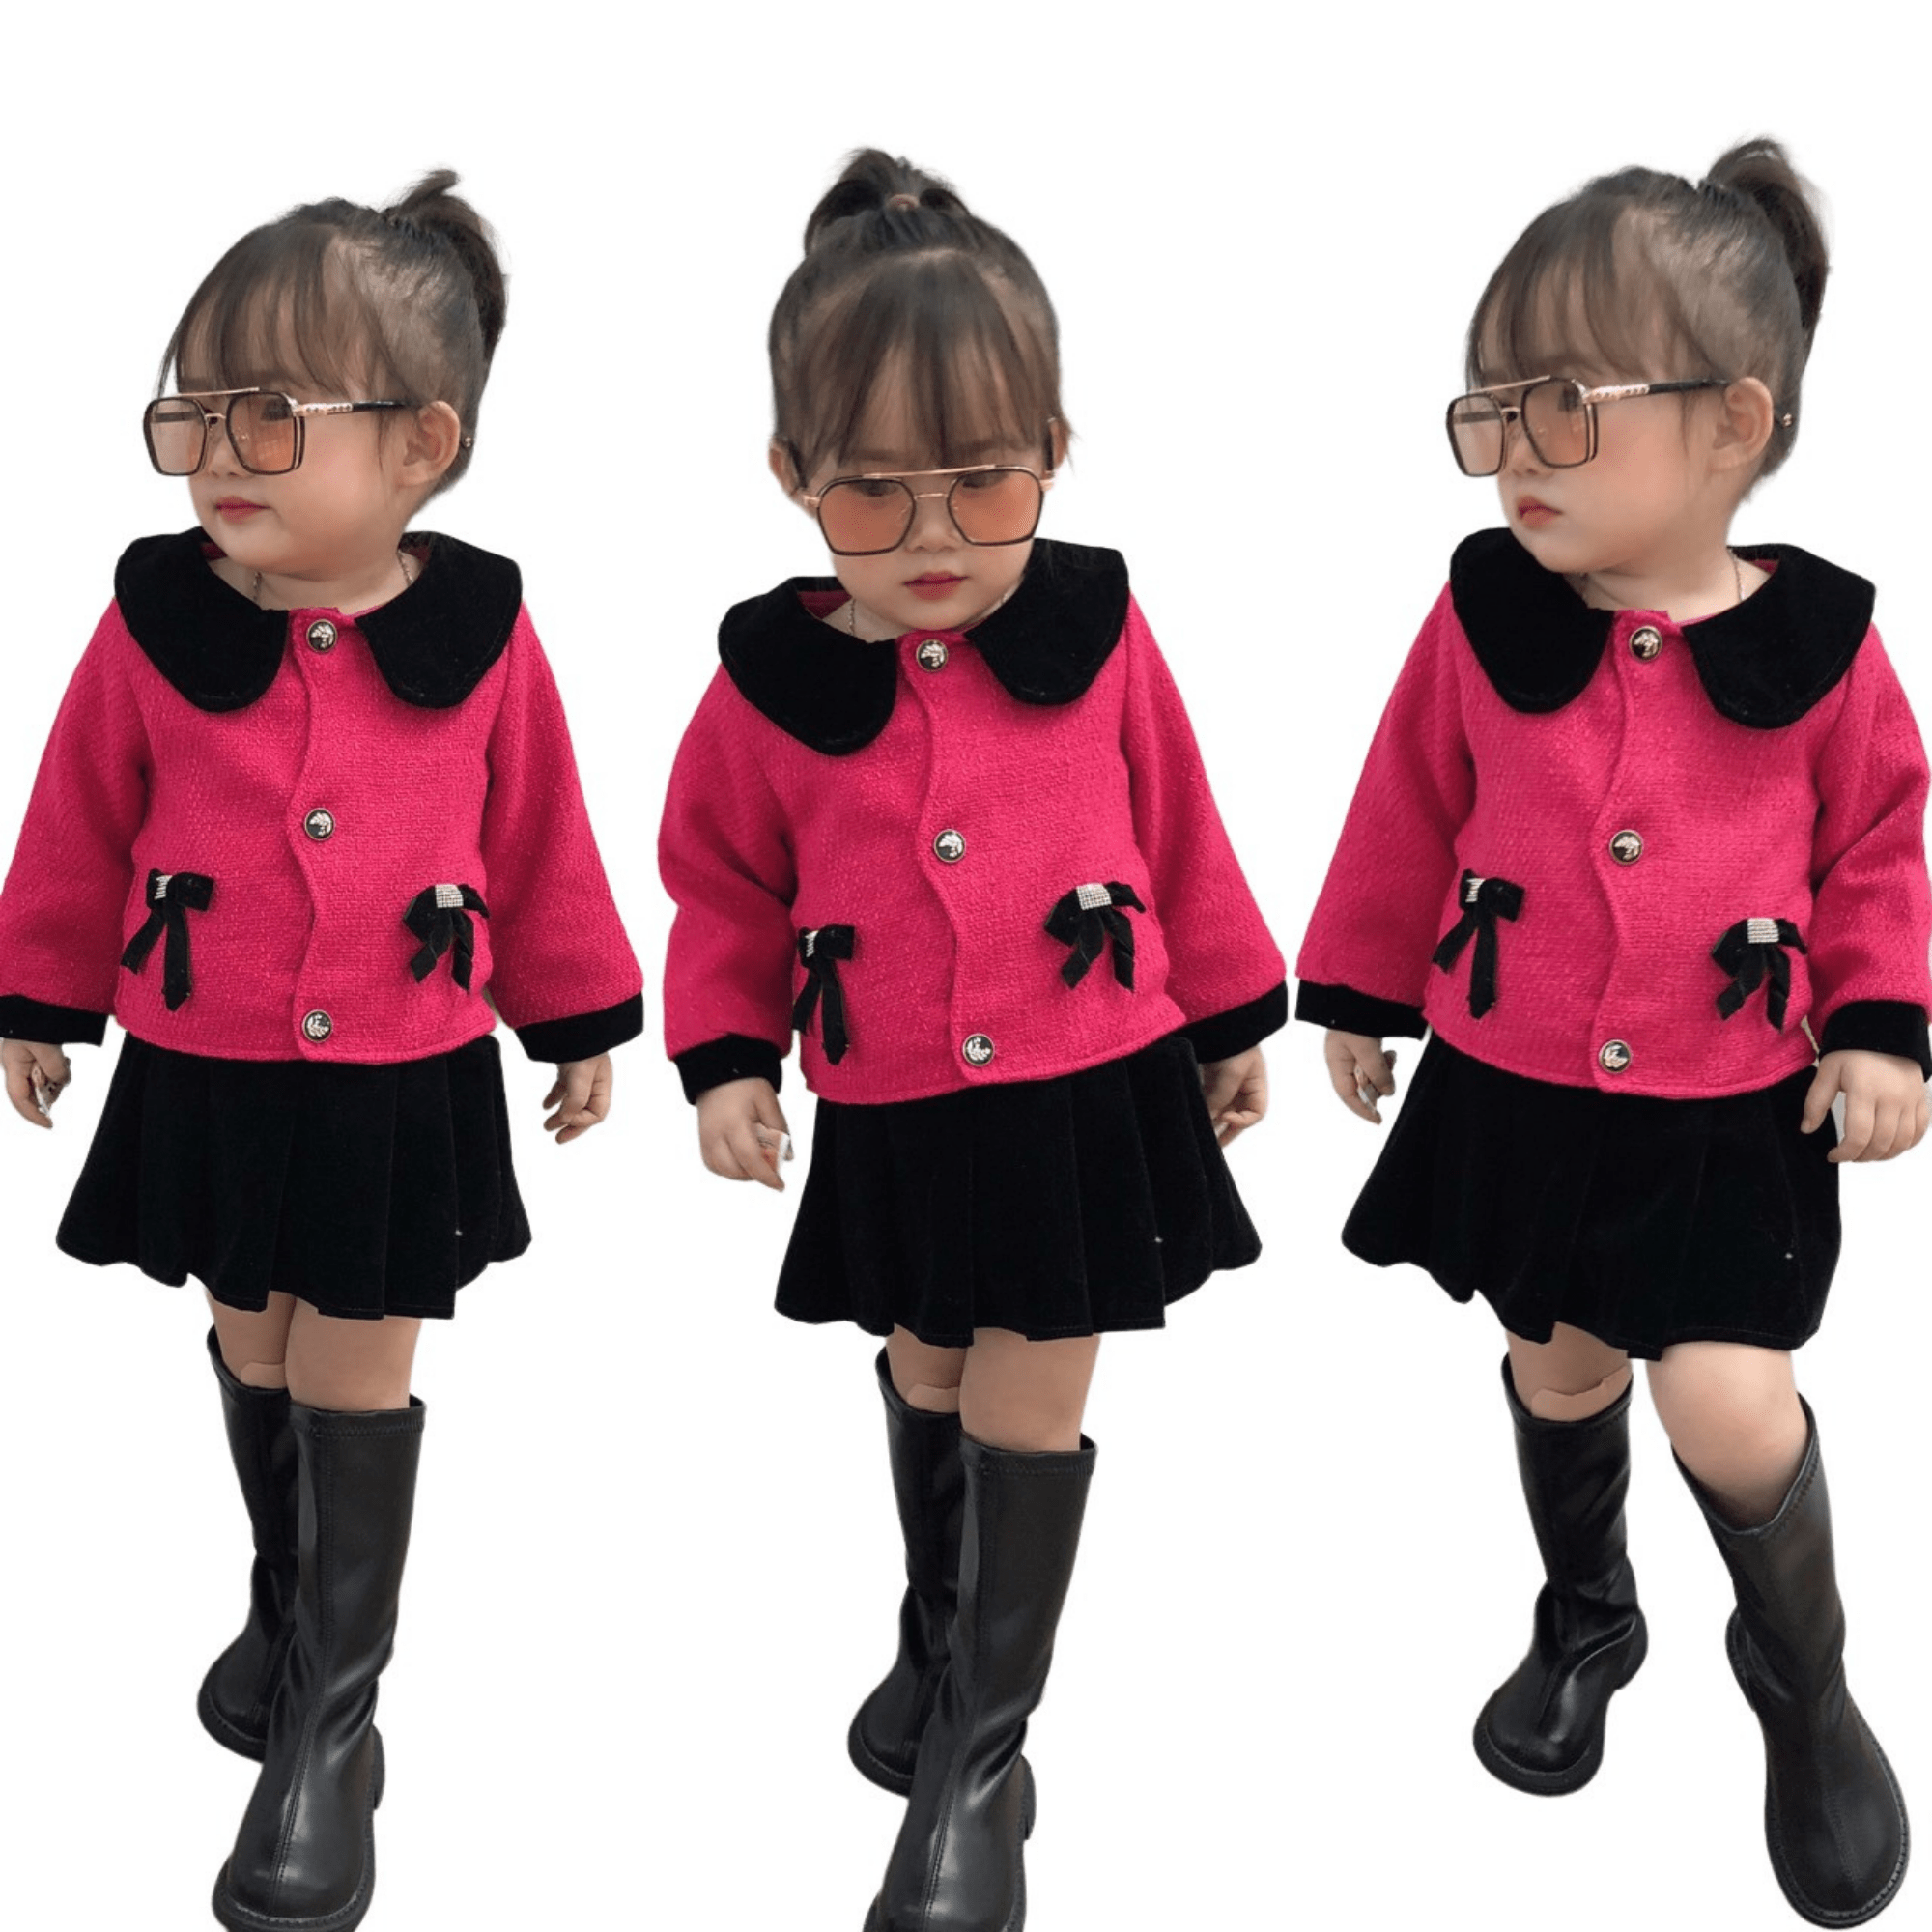 Kids Designers Clothes Comfortable 100% Wool Dresses New Fashion Each One In Opp Bag From Vietnam Manufacturer 8